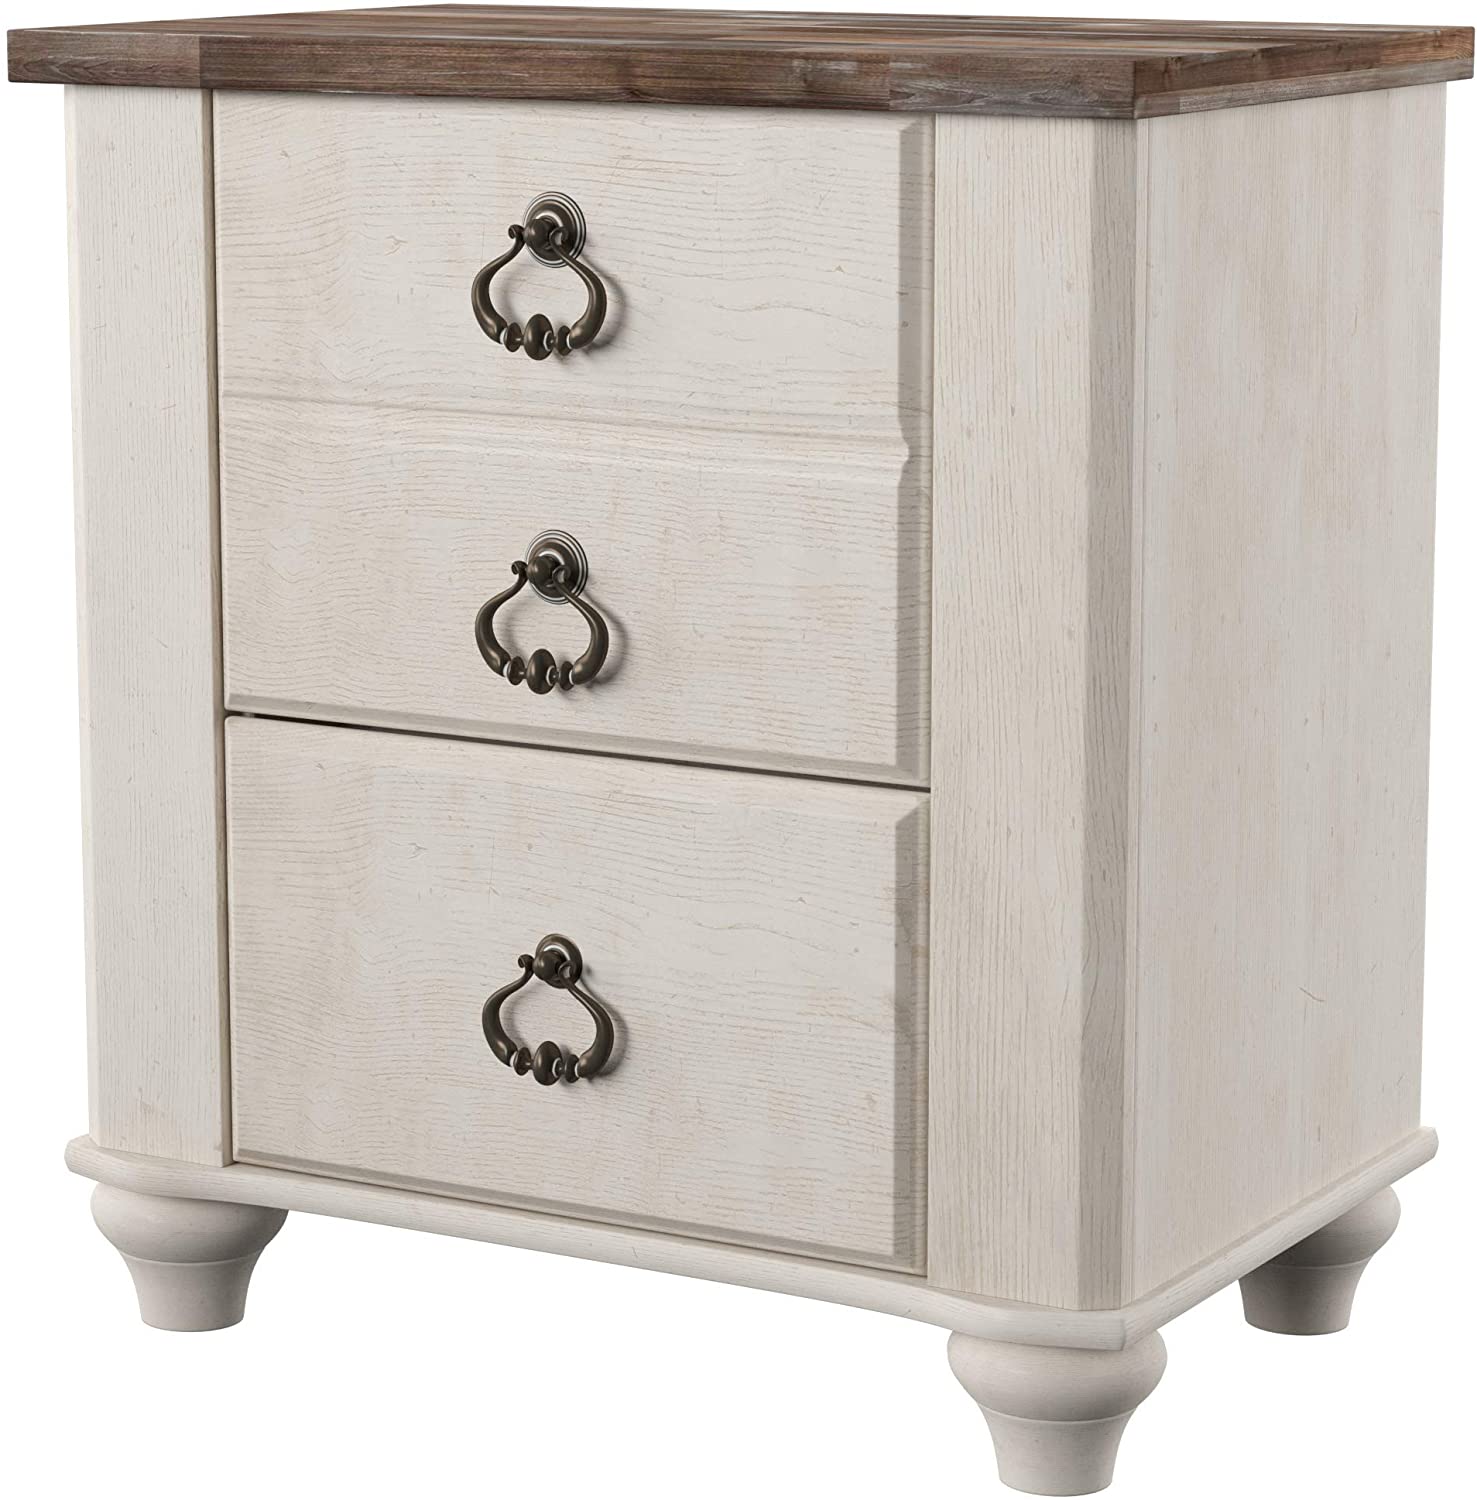 <strong>2. Ashley Furniture Signature Design</strong>